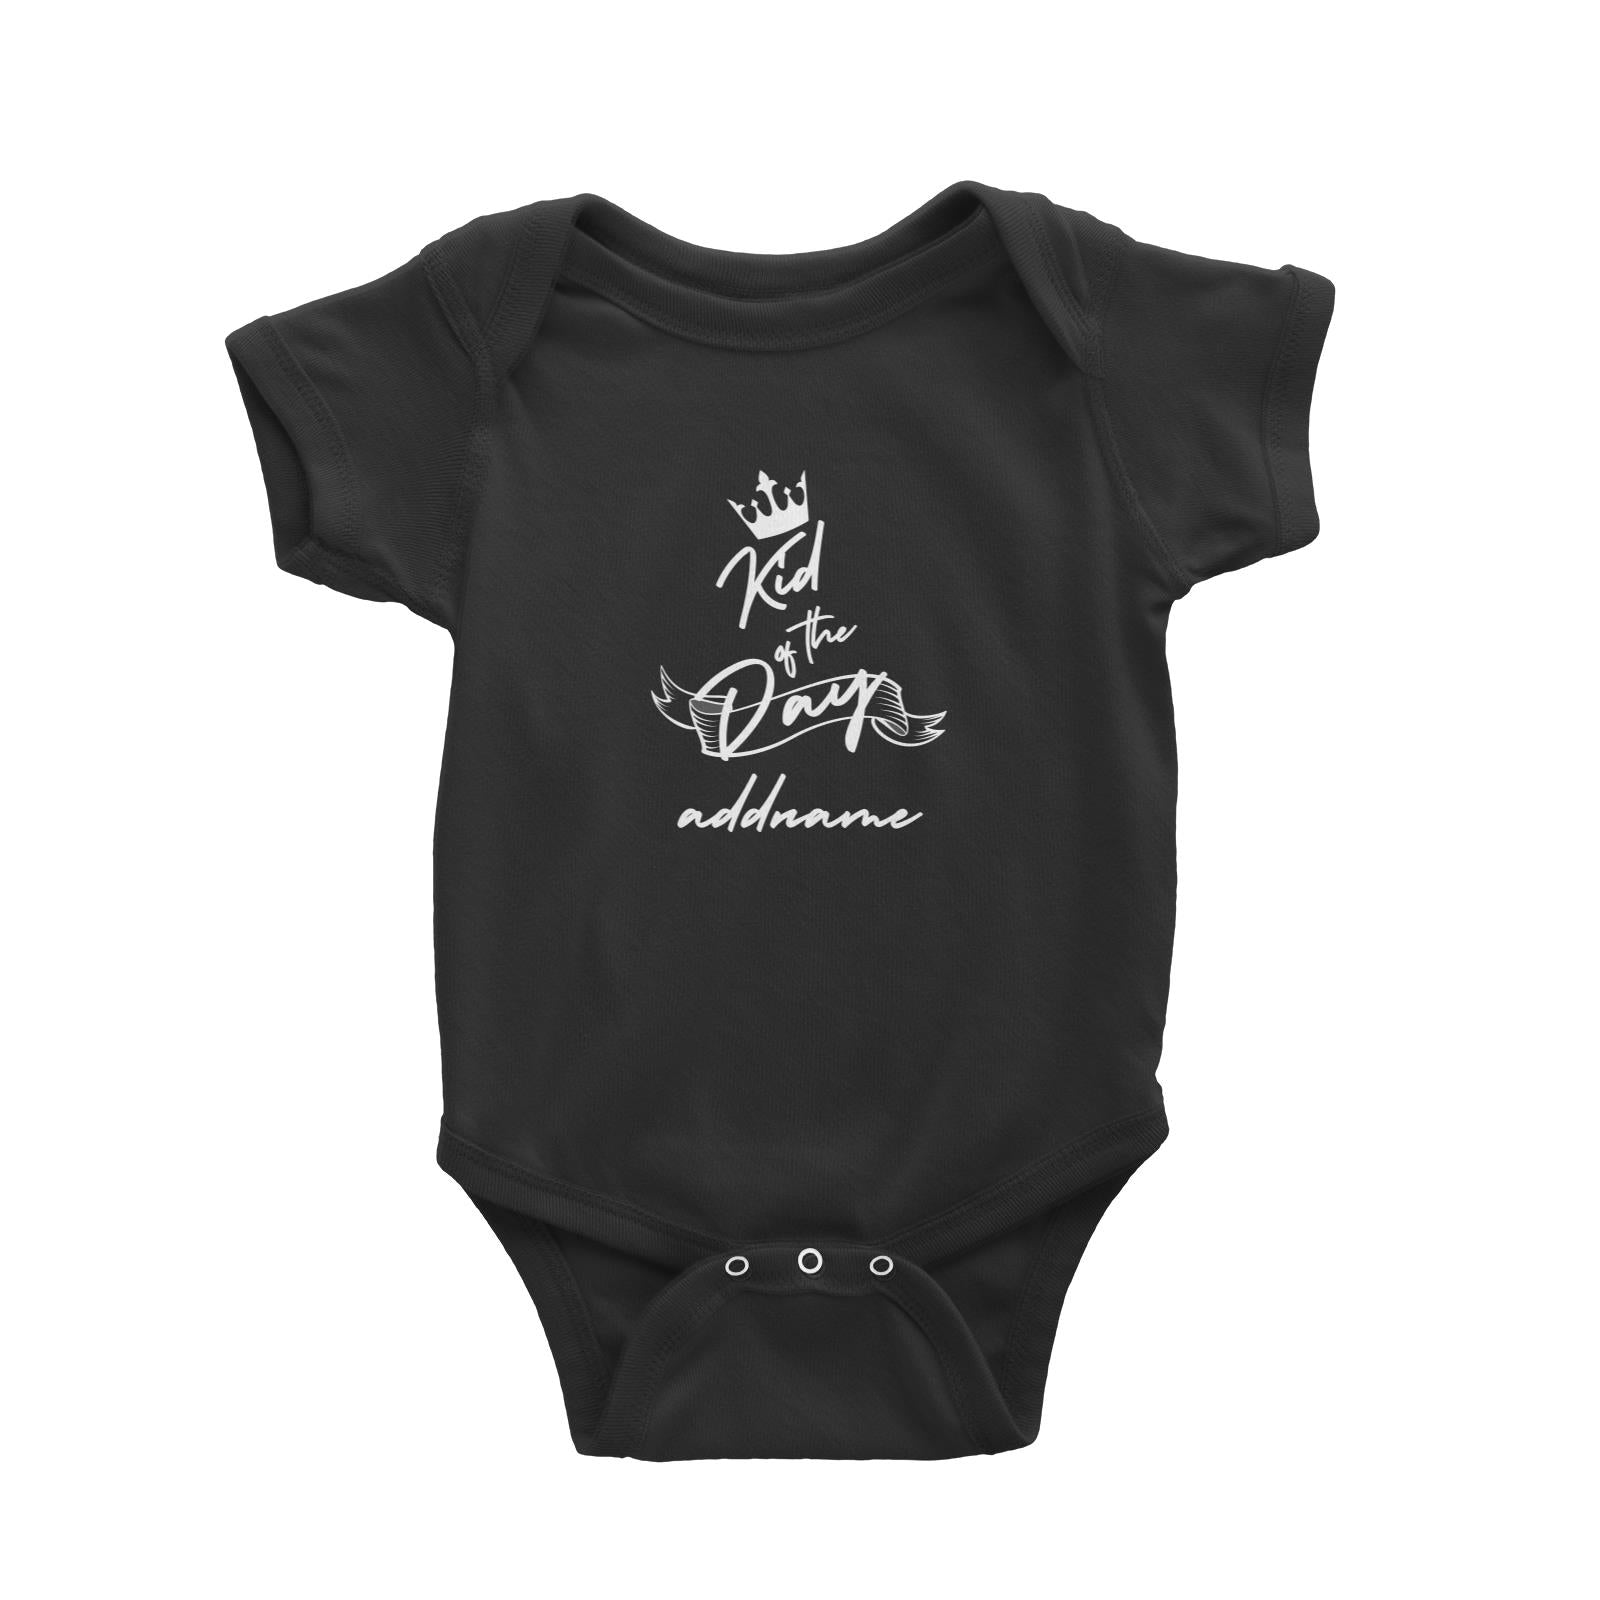 Birthday Typography Kid Of The Day Addname Baby Romper